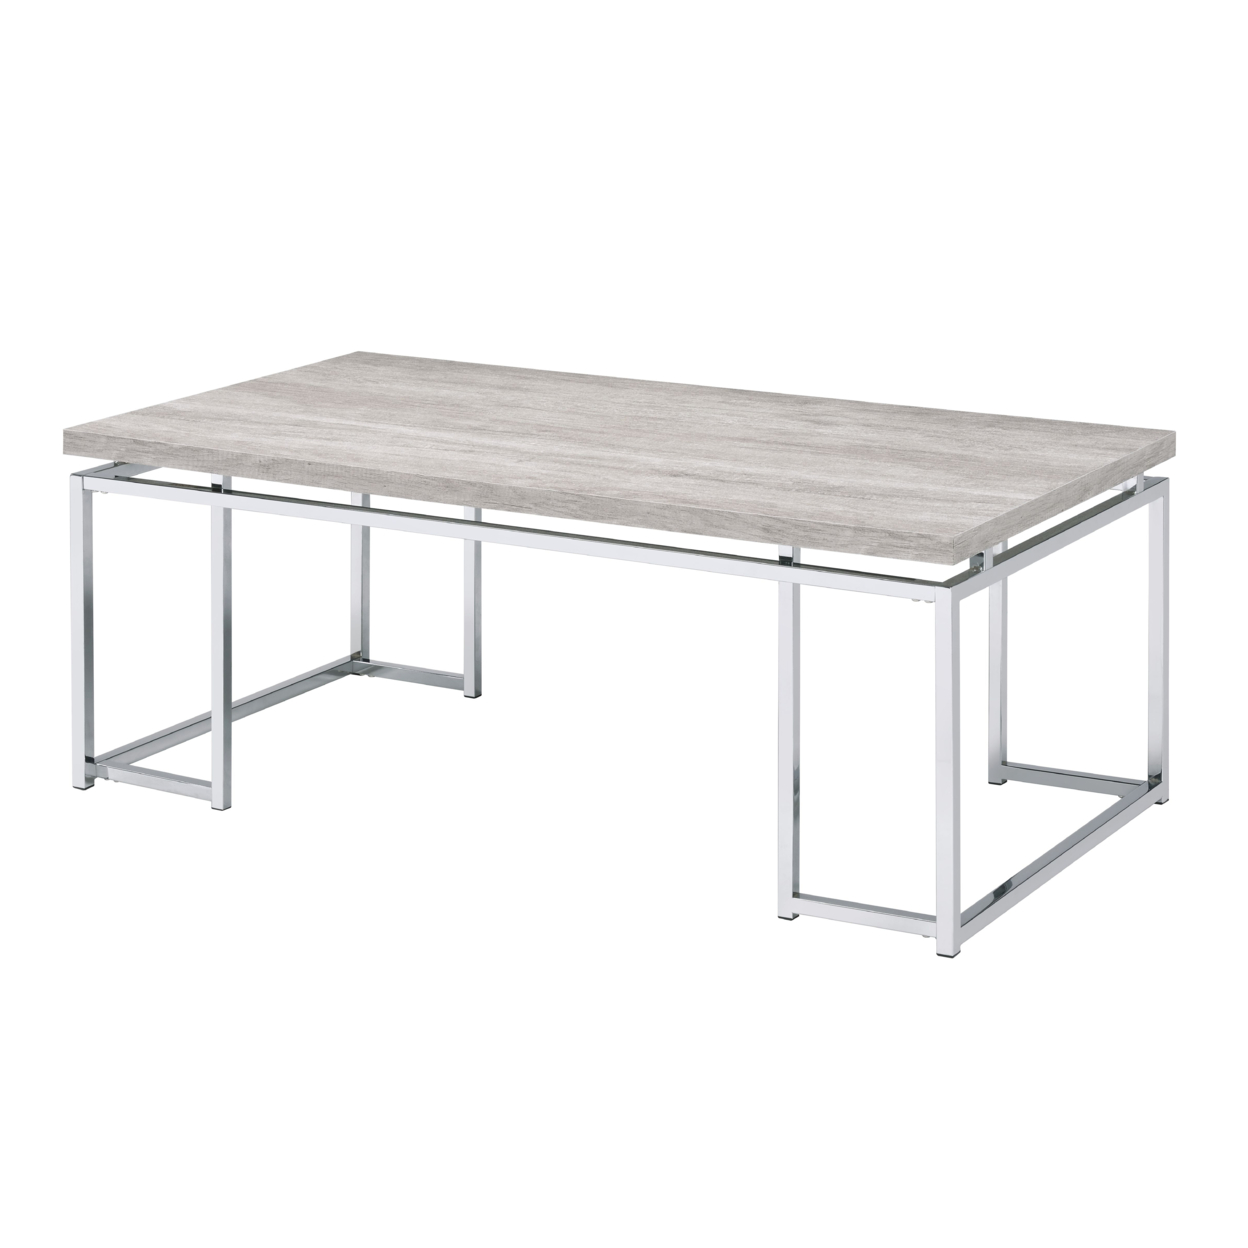 Coffee Table With Rectangular Tabletop And Metal Legs, Silver And Brown- Saltoro Sherpi